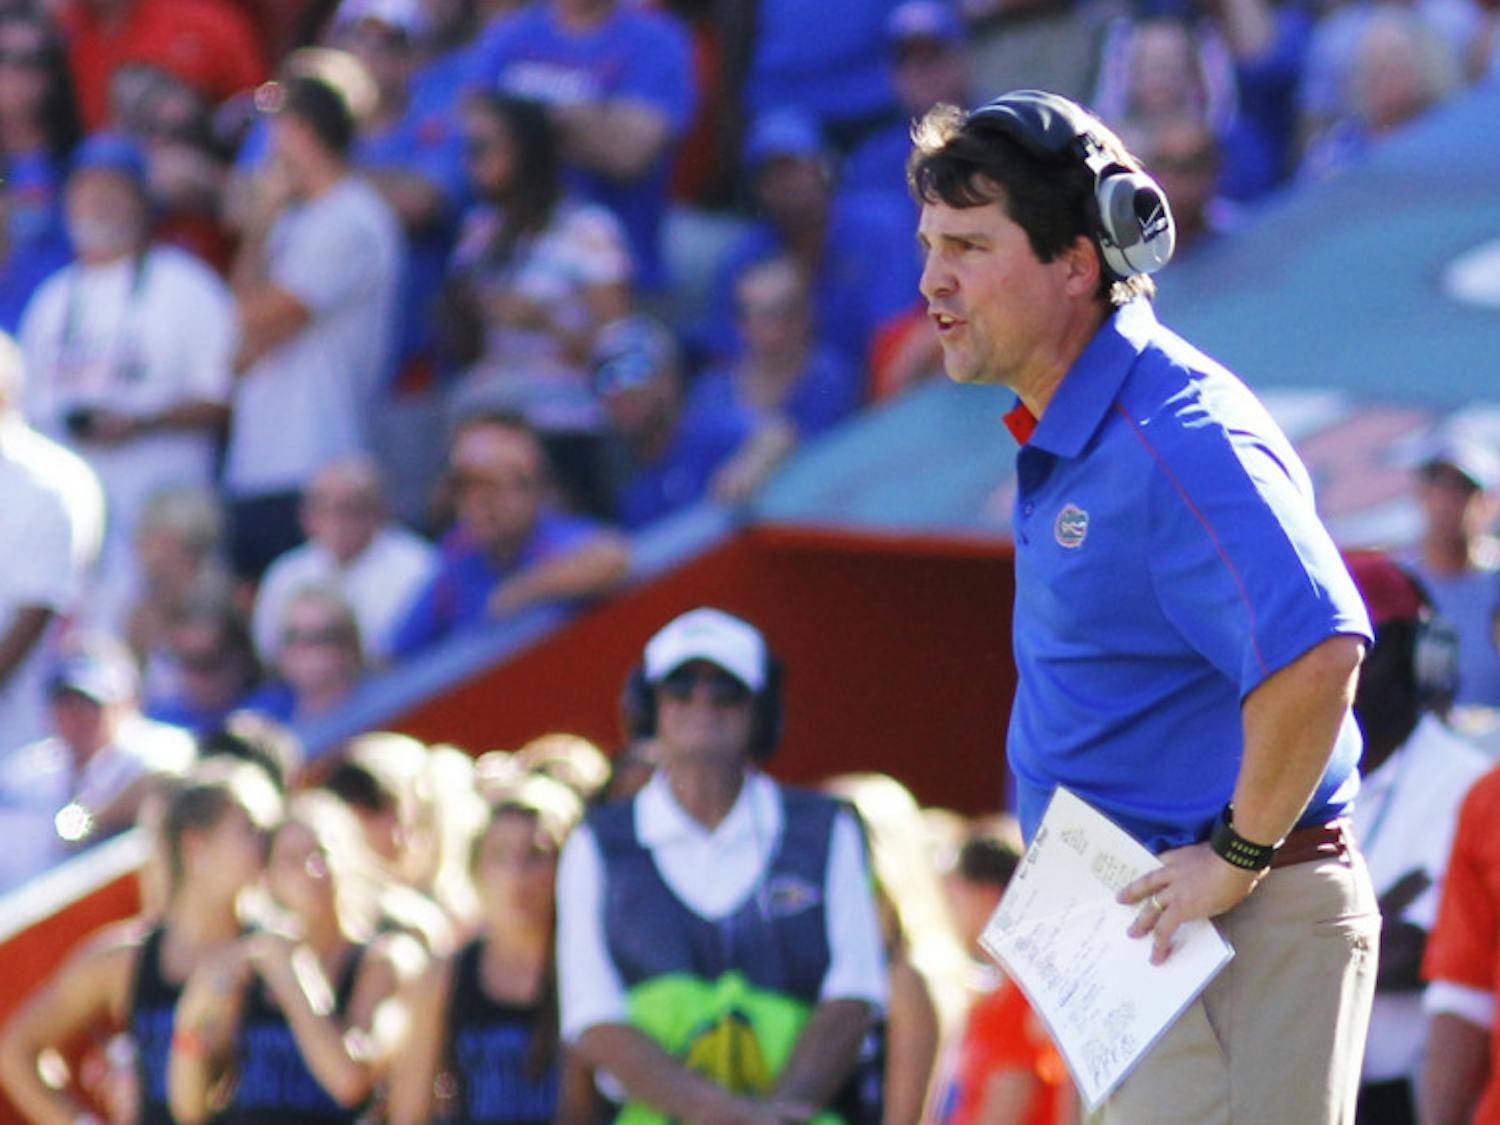 Gators coach Will Muschamp has Florida at 7-0 heading into its matchup against Georgia on Saturday. He has reenergized a team that went 15-11 after winning two national titles the previous four seasons.